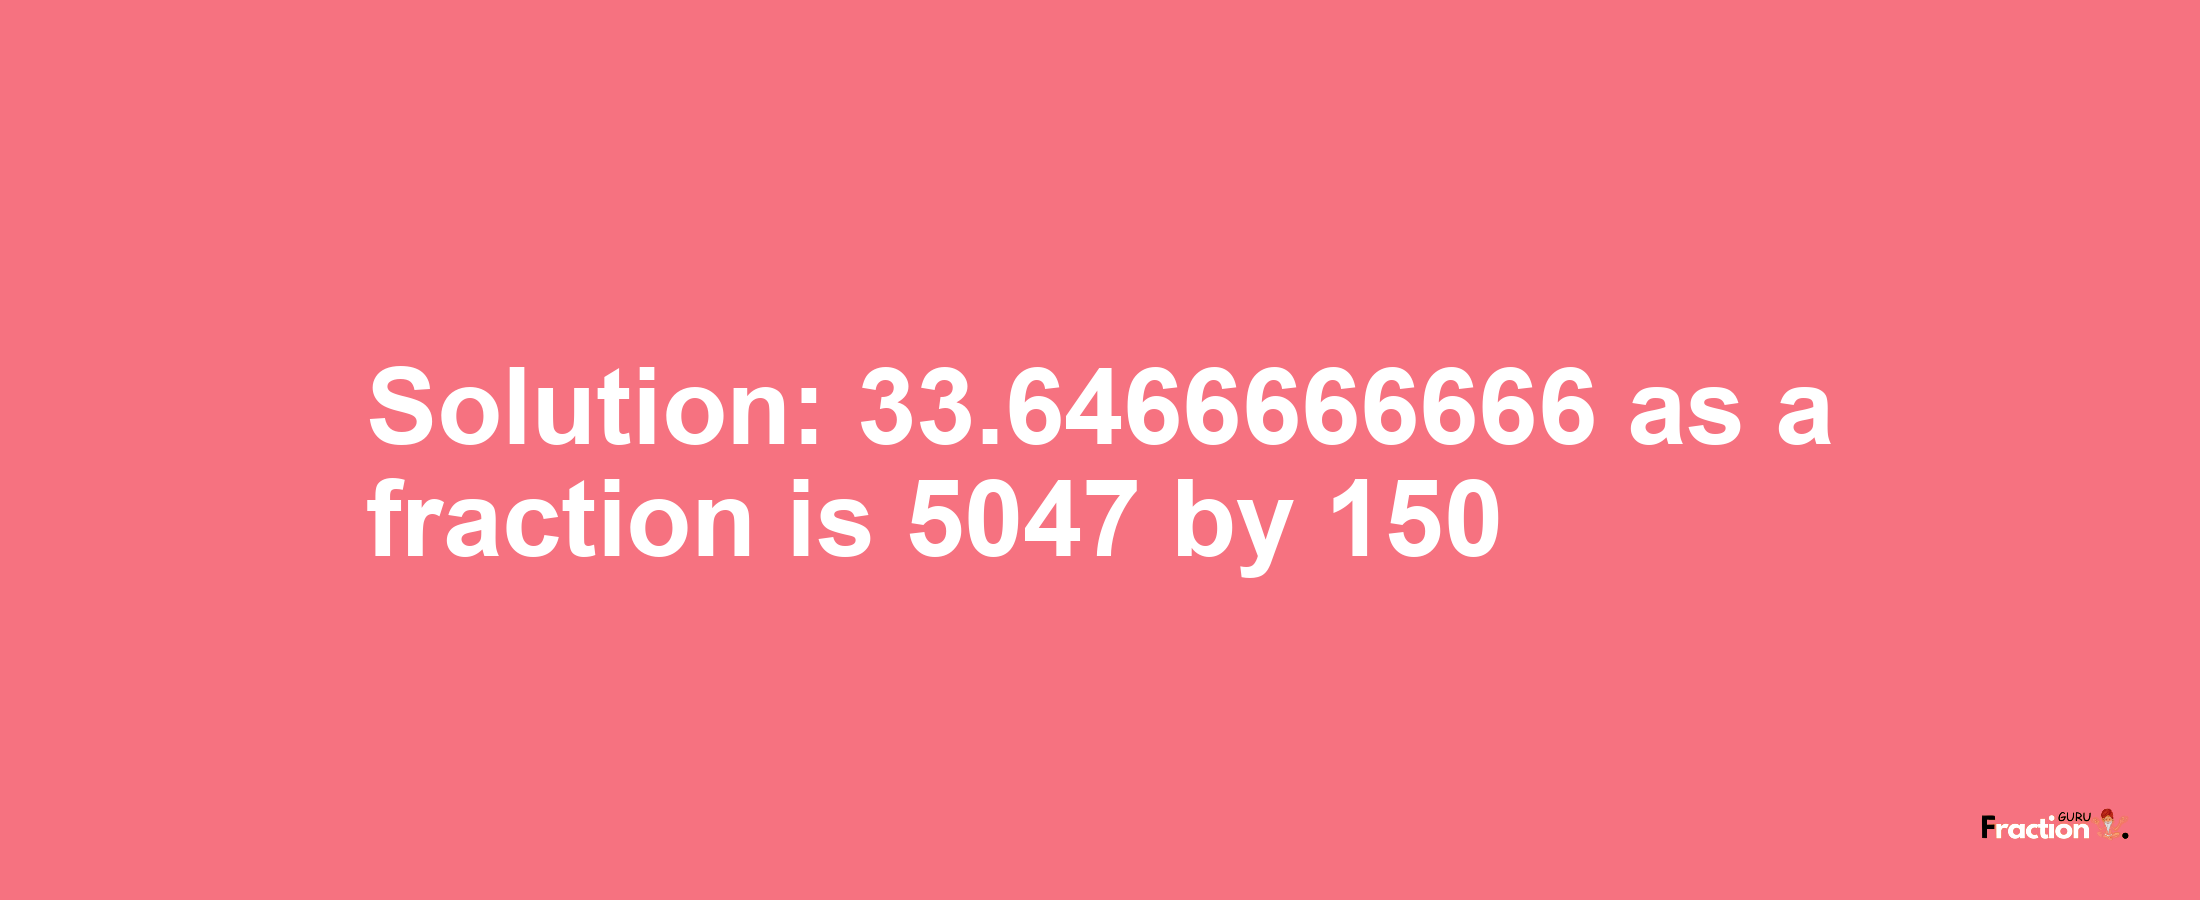 Solution:33.6466666666 as a fraction is 5047/150